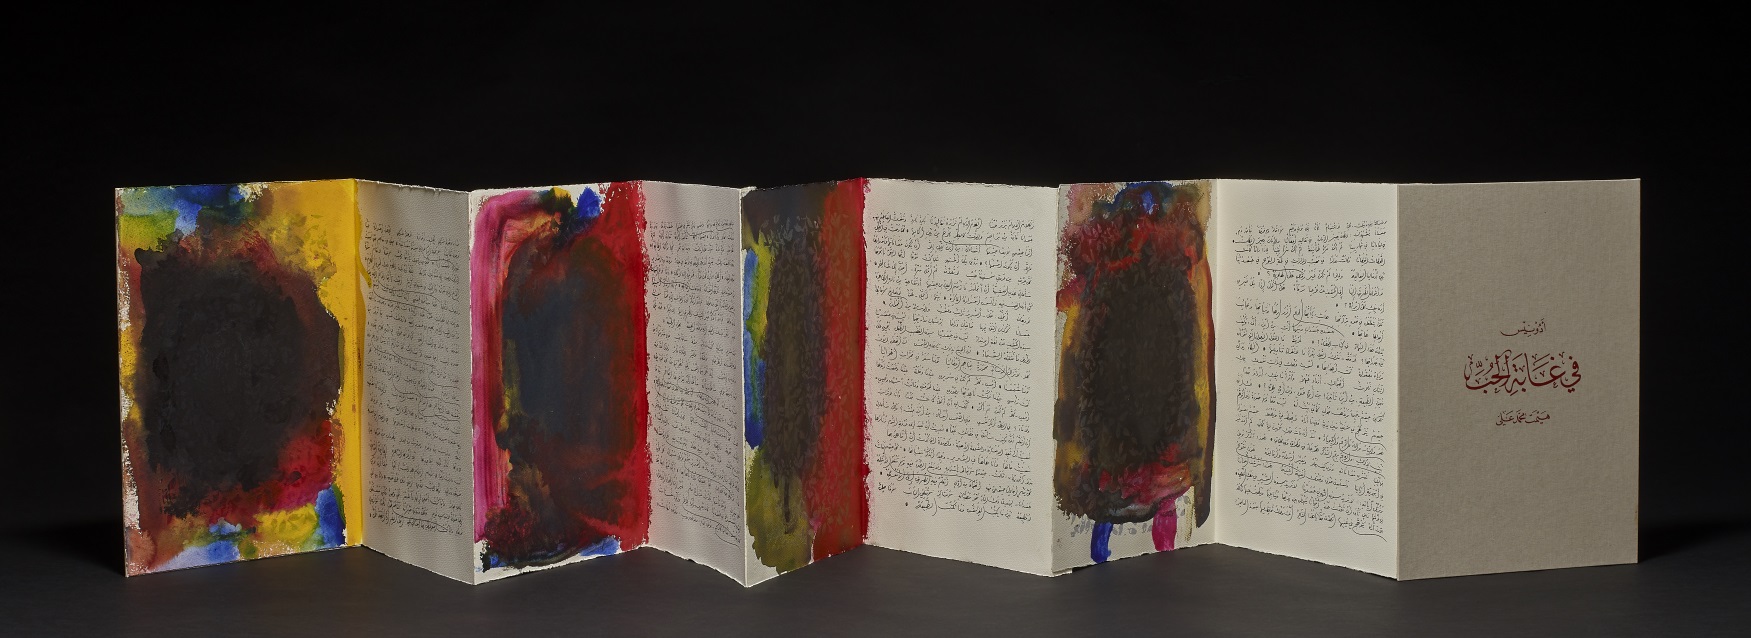 Artist's book by Himat Mohammed Ali